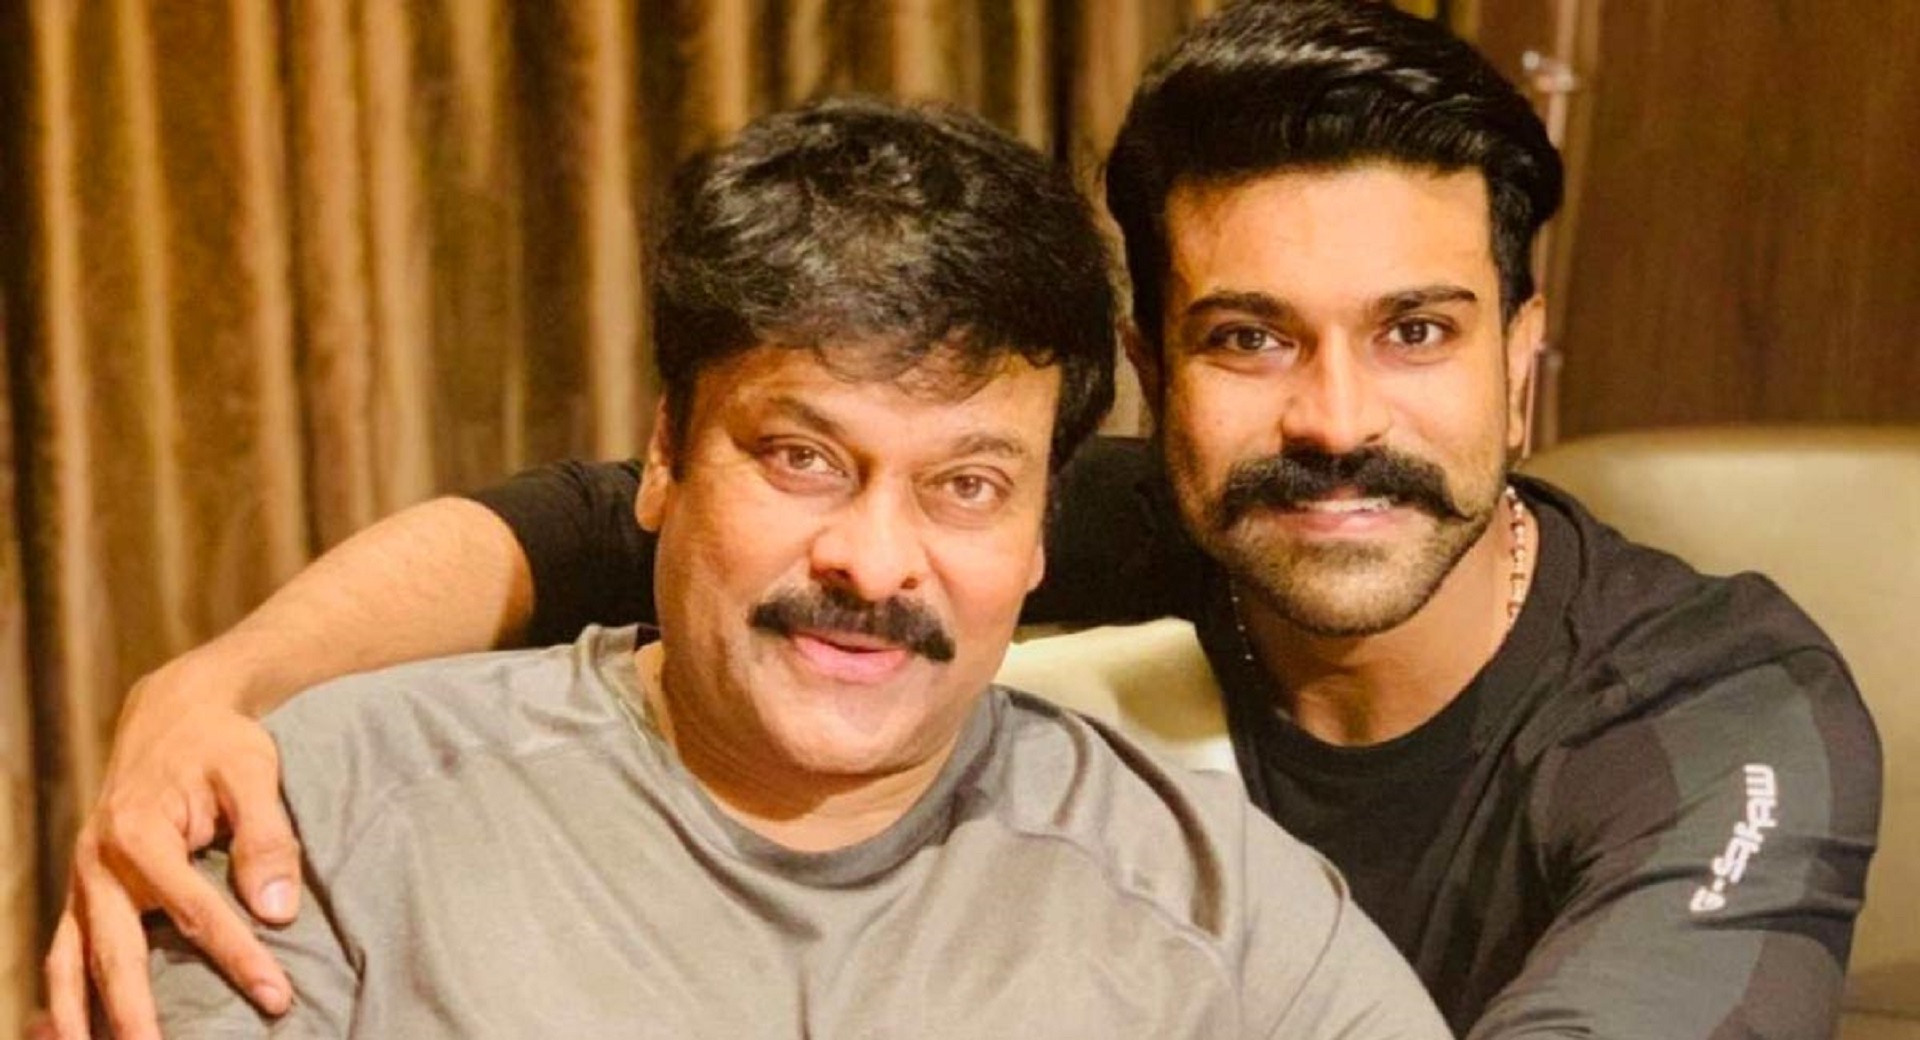 ChiranJeevi is a ‘proud’ father as son Ram Charan completes 15 years in the industry, writes a heartfelt post